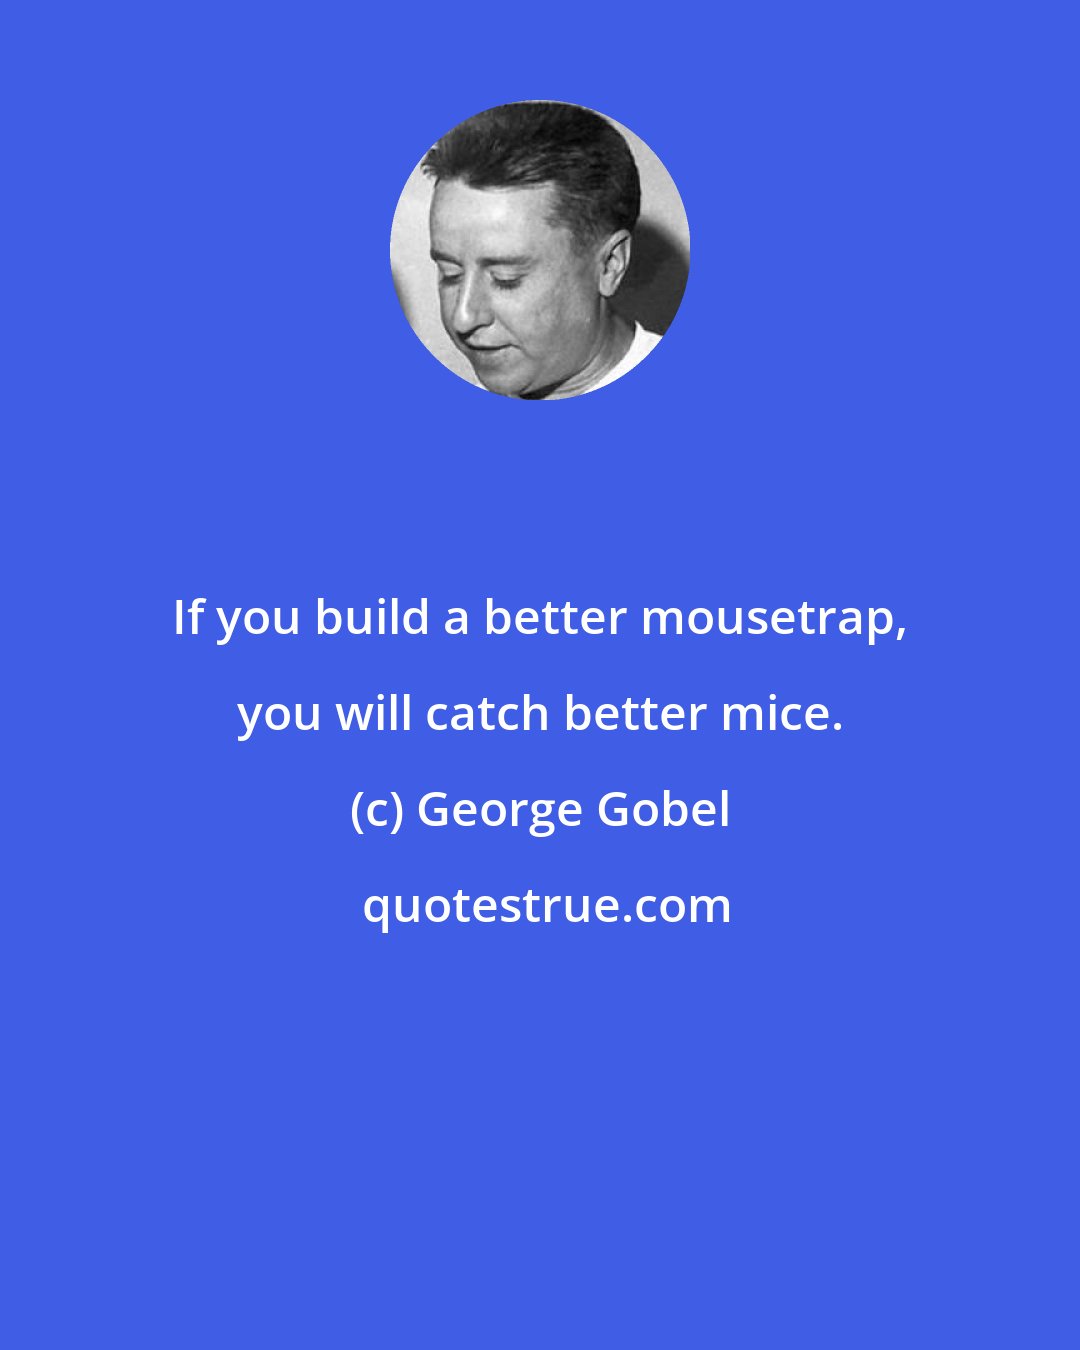 George Gobel: If you build a better mousetrap, you will catch better mice.